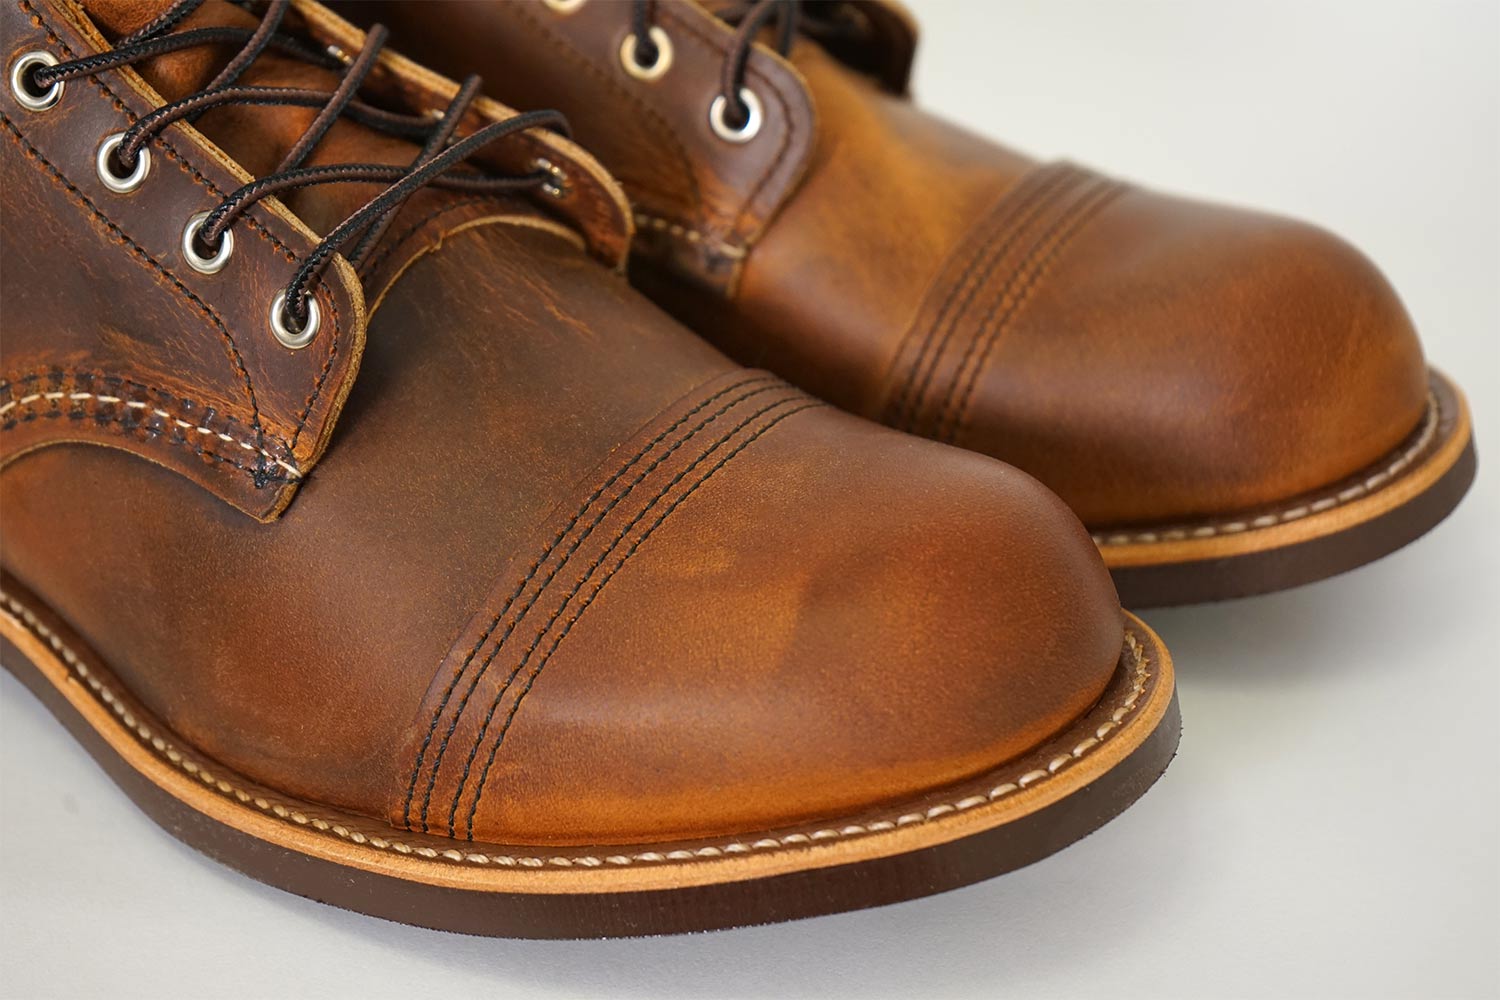 The signature toe cap on a pair of Iron Ranger boots from Red Wing Shoes